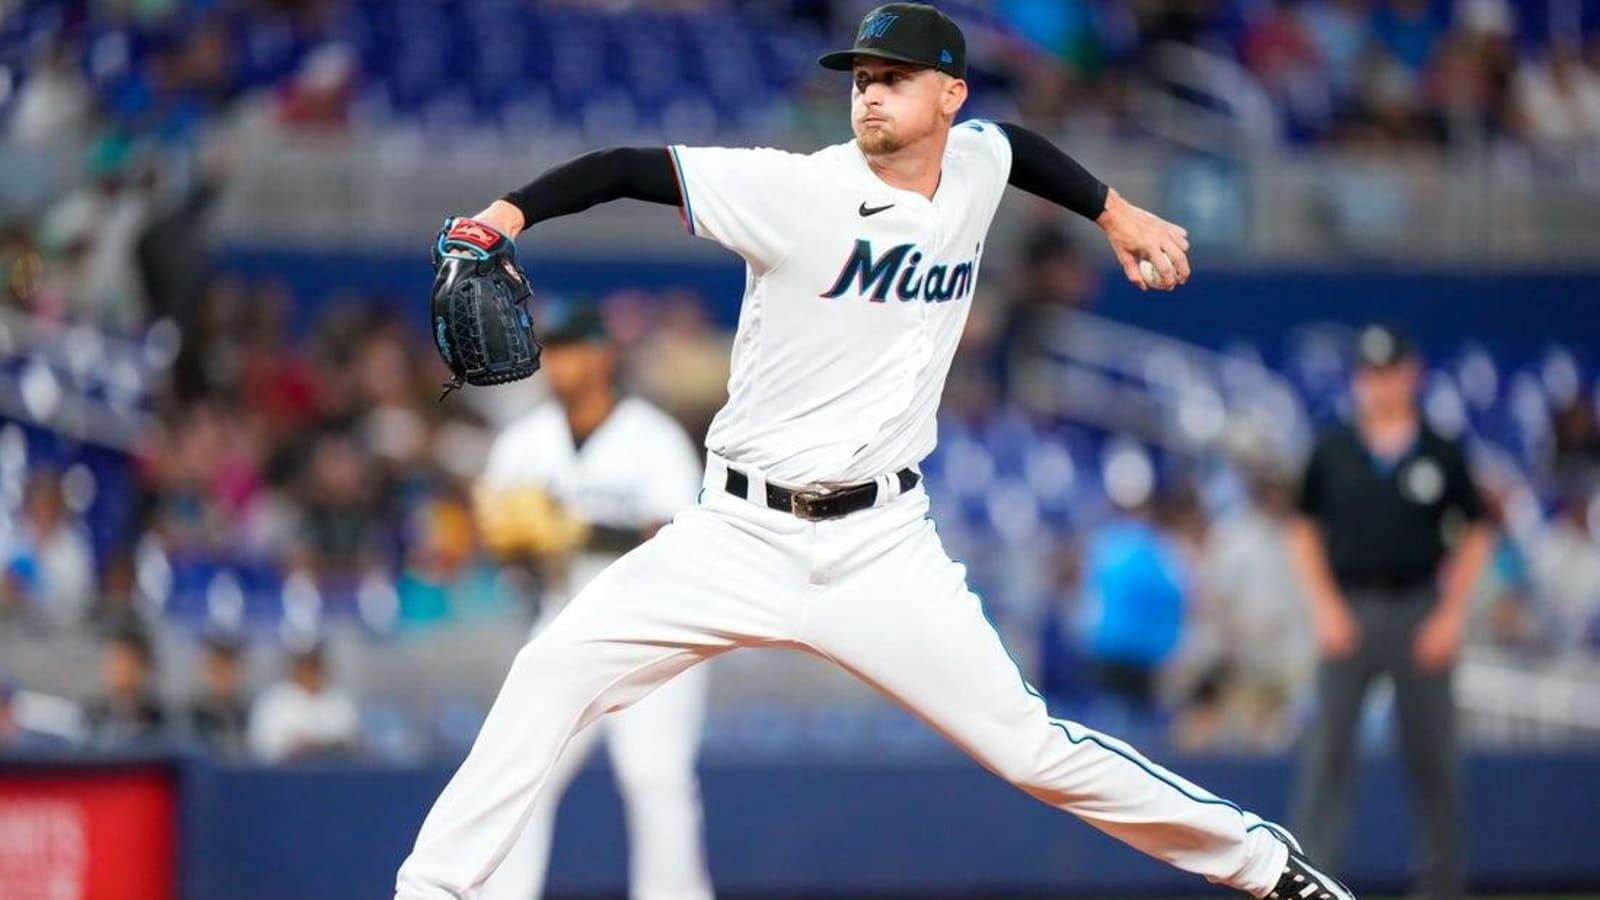 Jean Segura, Nick Fortes are clutch as Marlins rally past Padres